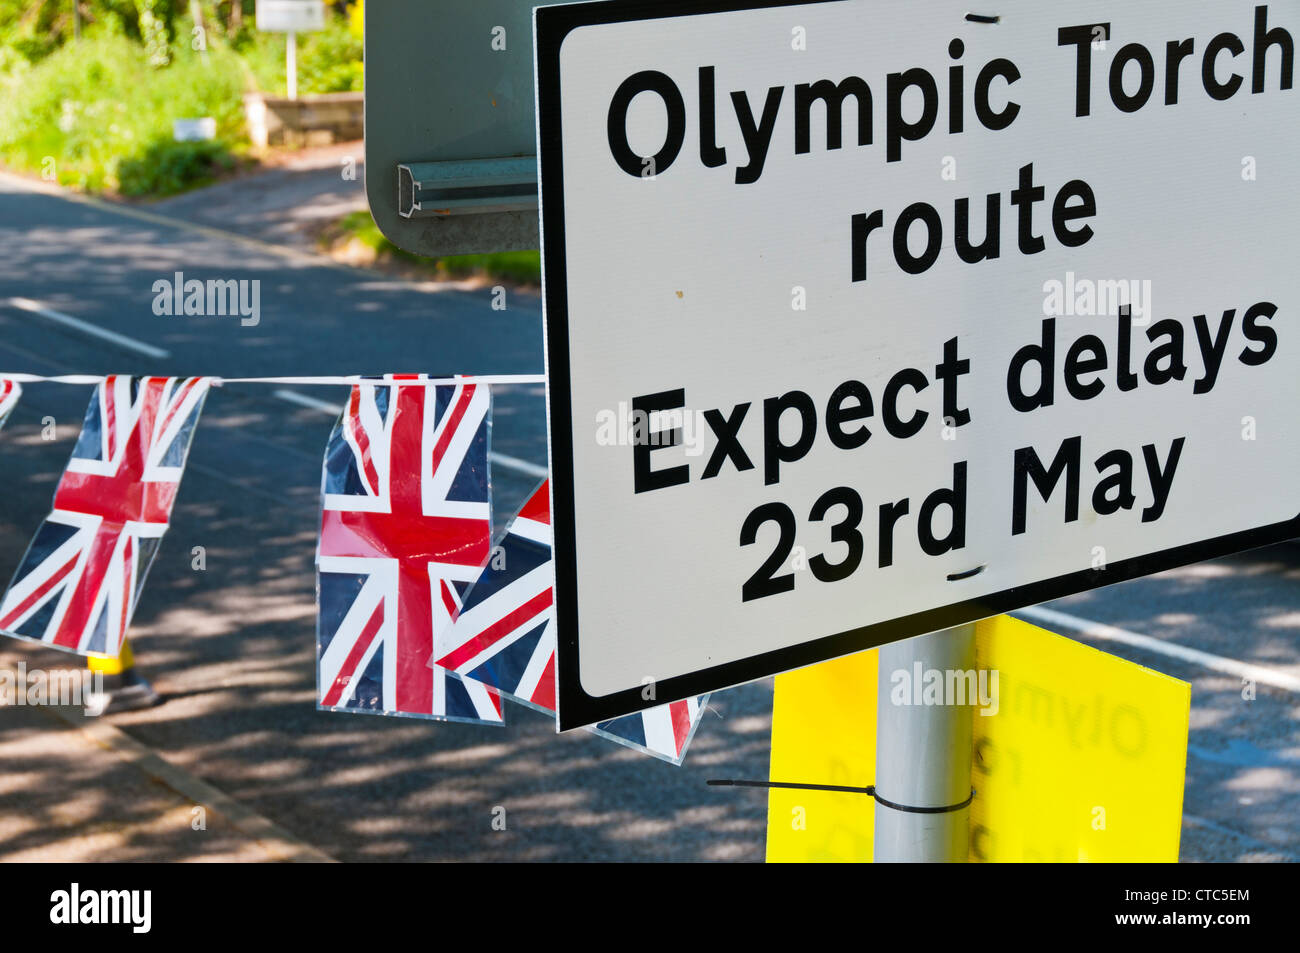 Olympic Torch route sign, Painswick, Gloucestershire, UK Stock Photo